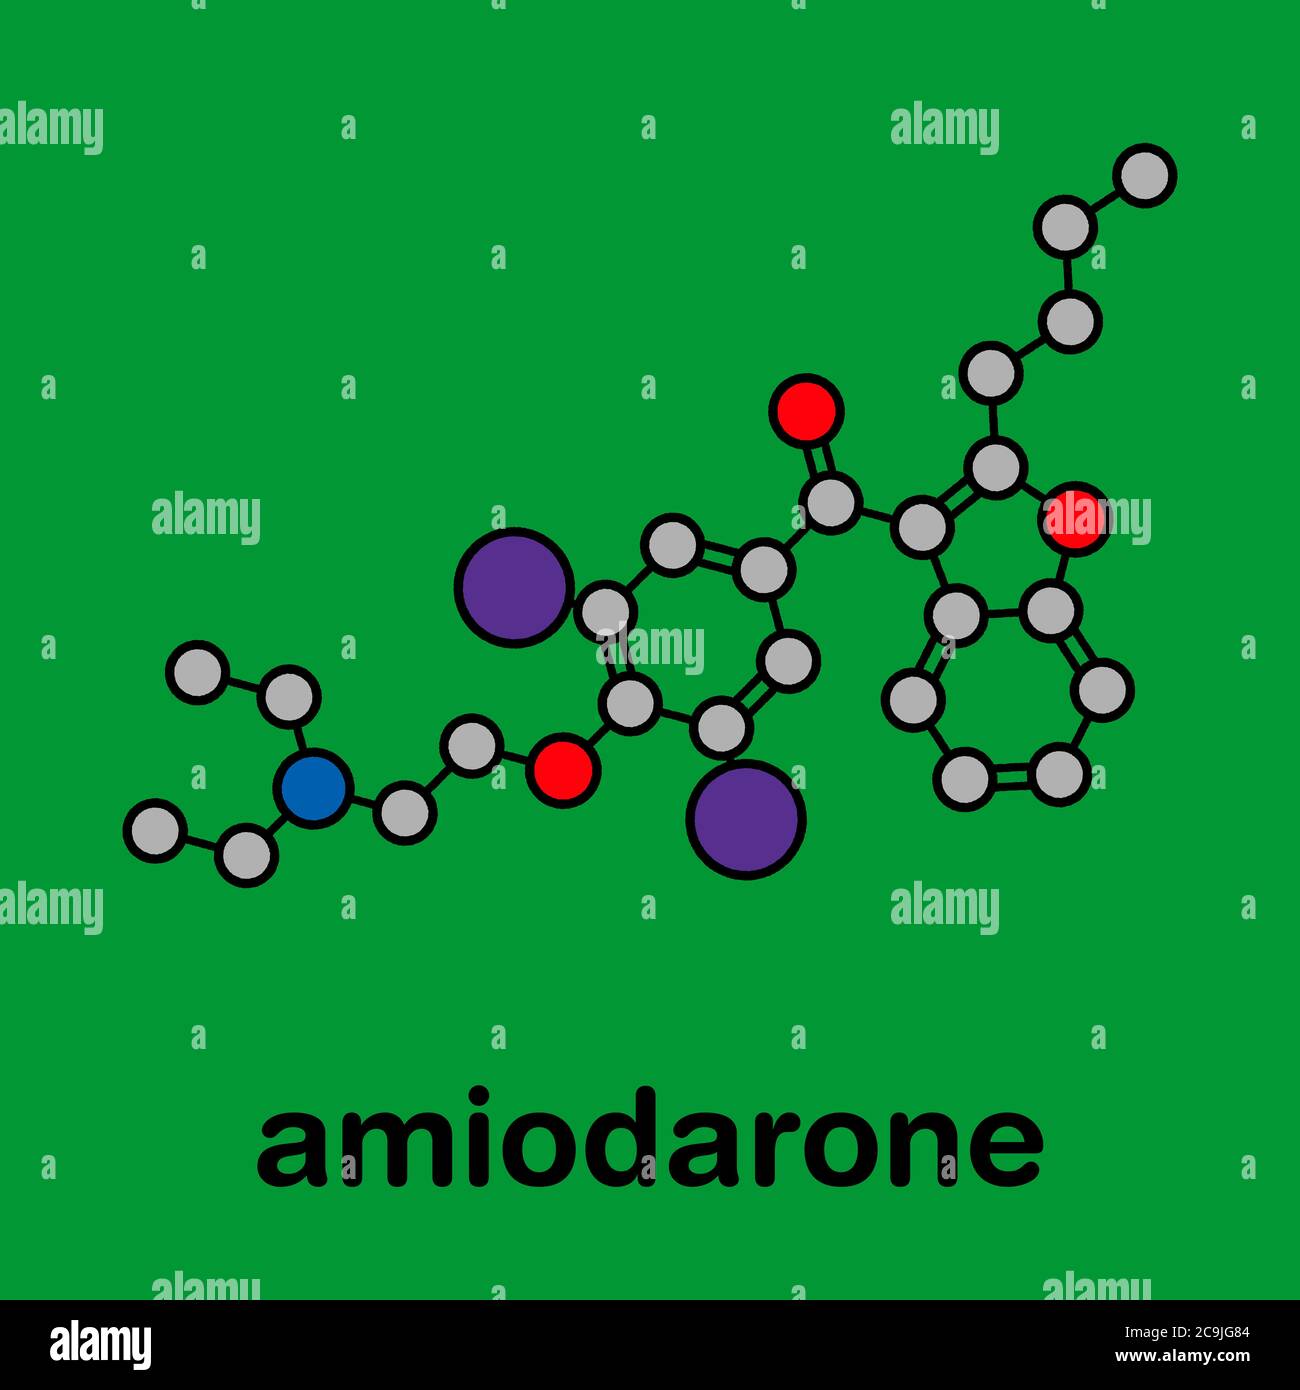 Amiodarone antiarrhythmic drug molecule. Stylized skeletal formula (chemical structure). Atoms are shown as color-coded circles with thick black outli Stock Photo